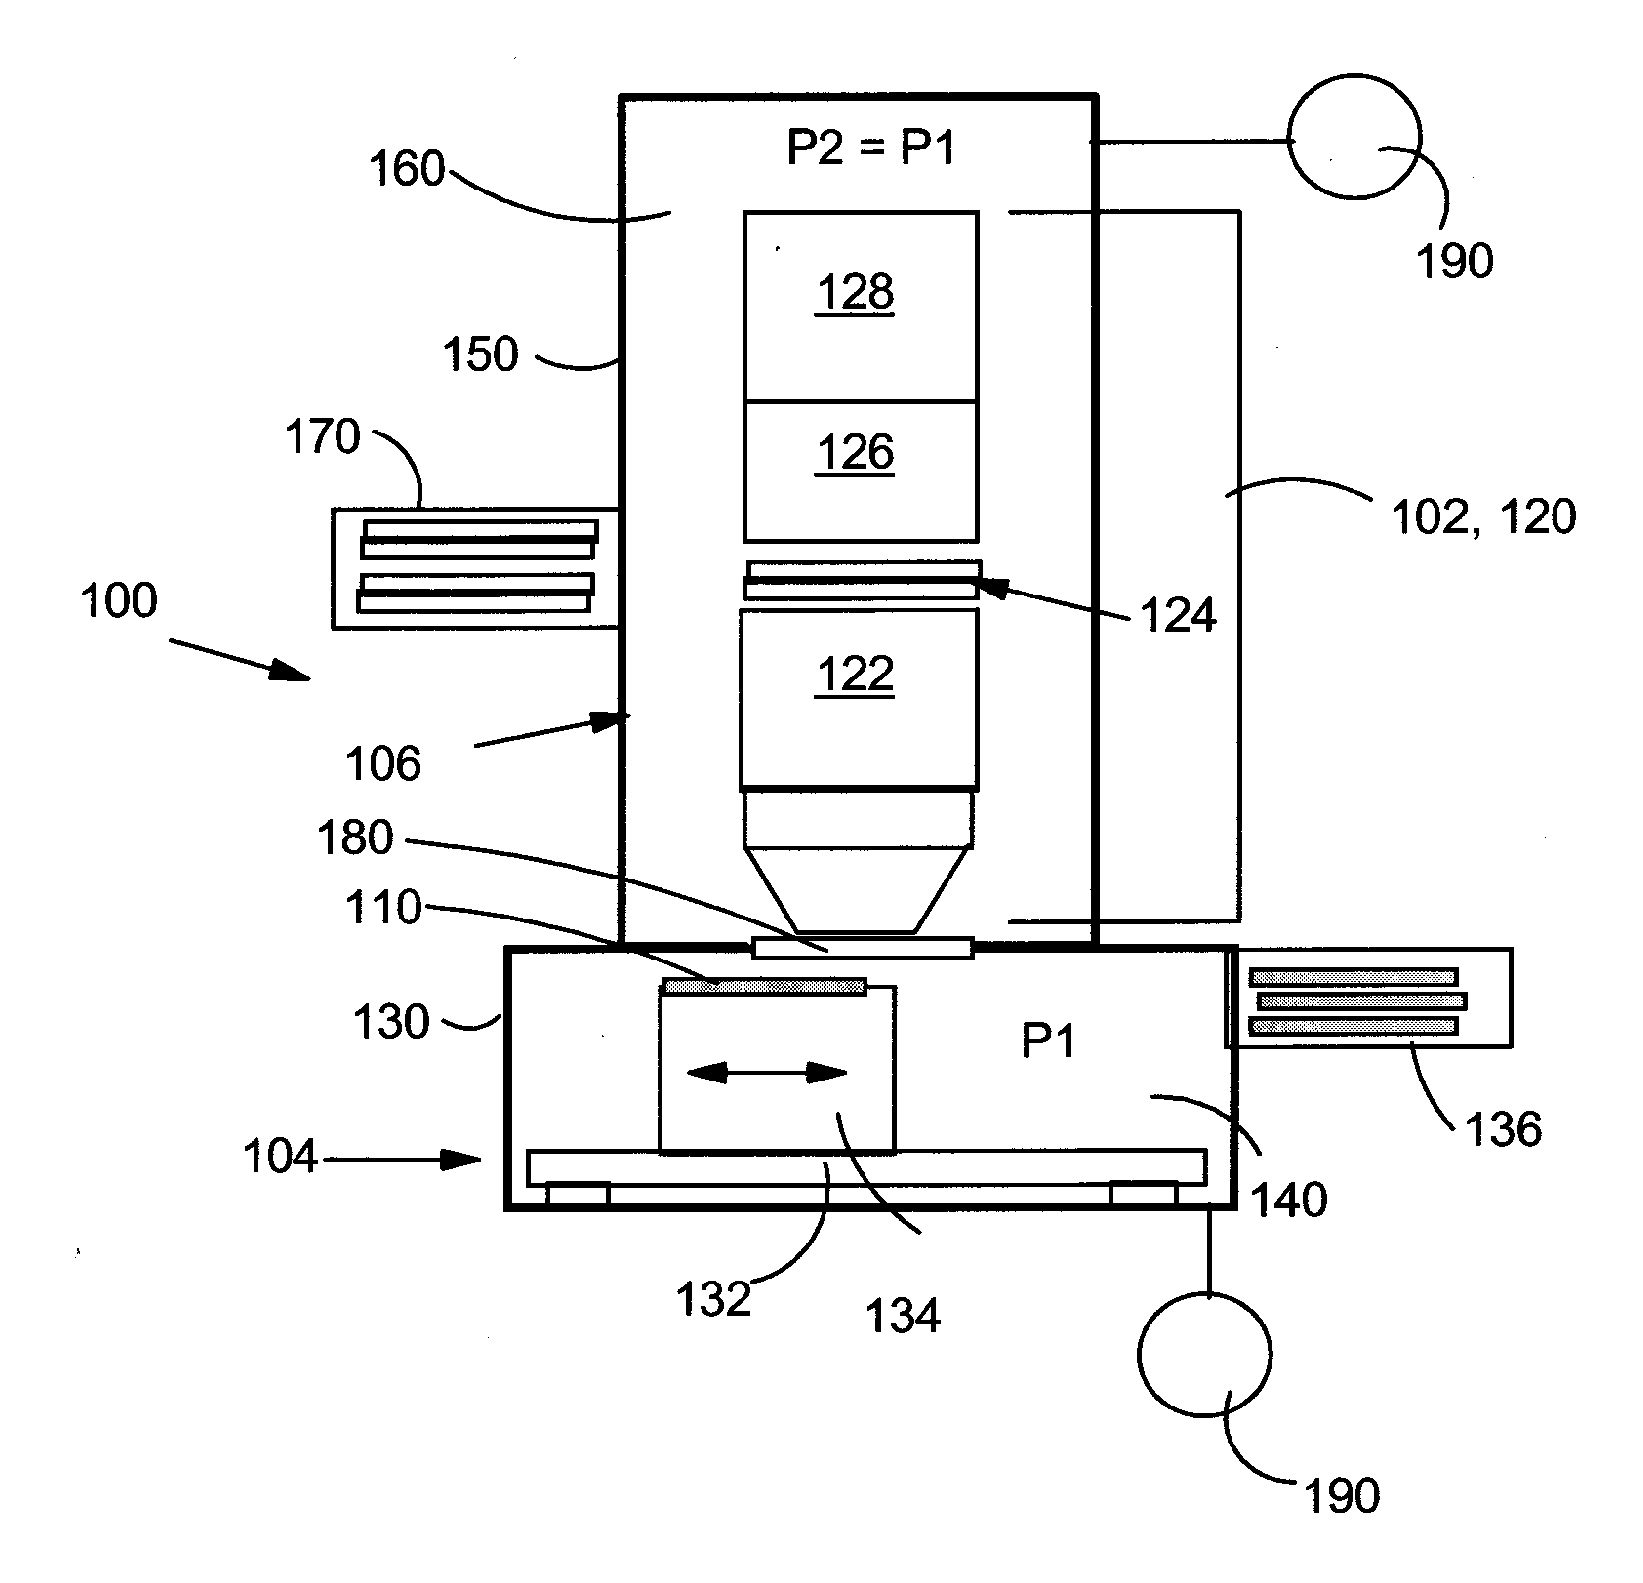 Immersion lithography with equalized pressure on at least projection optics component and wafer